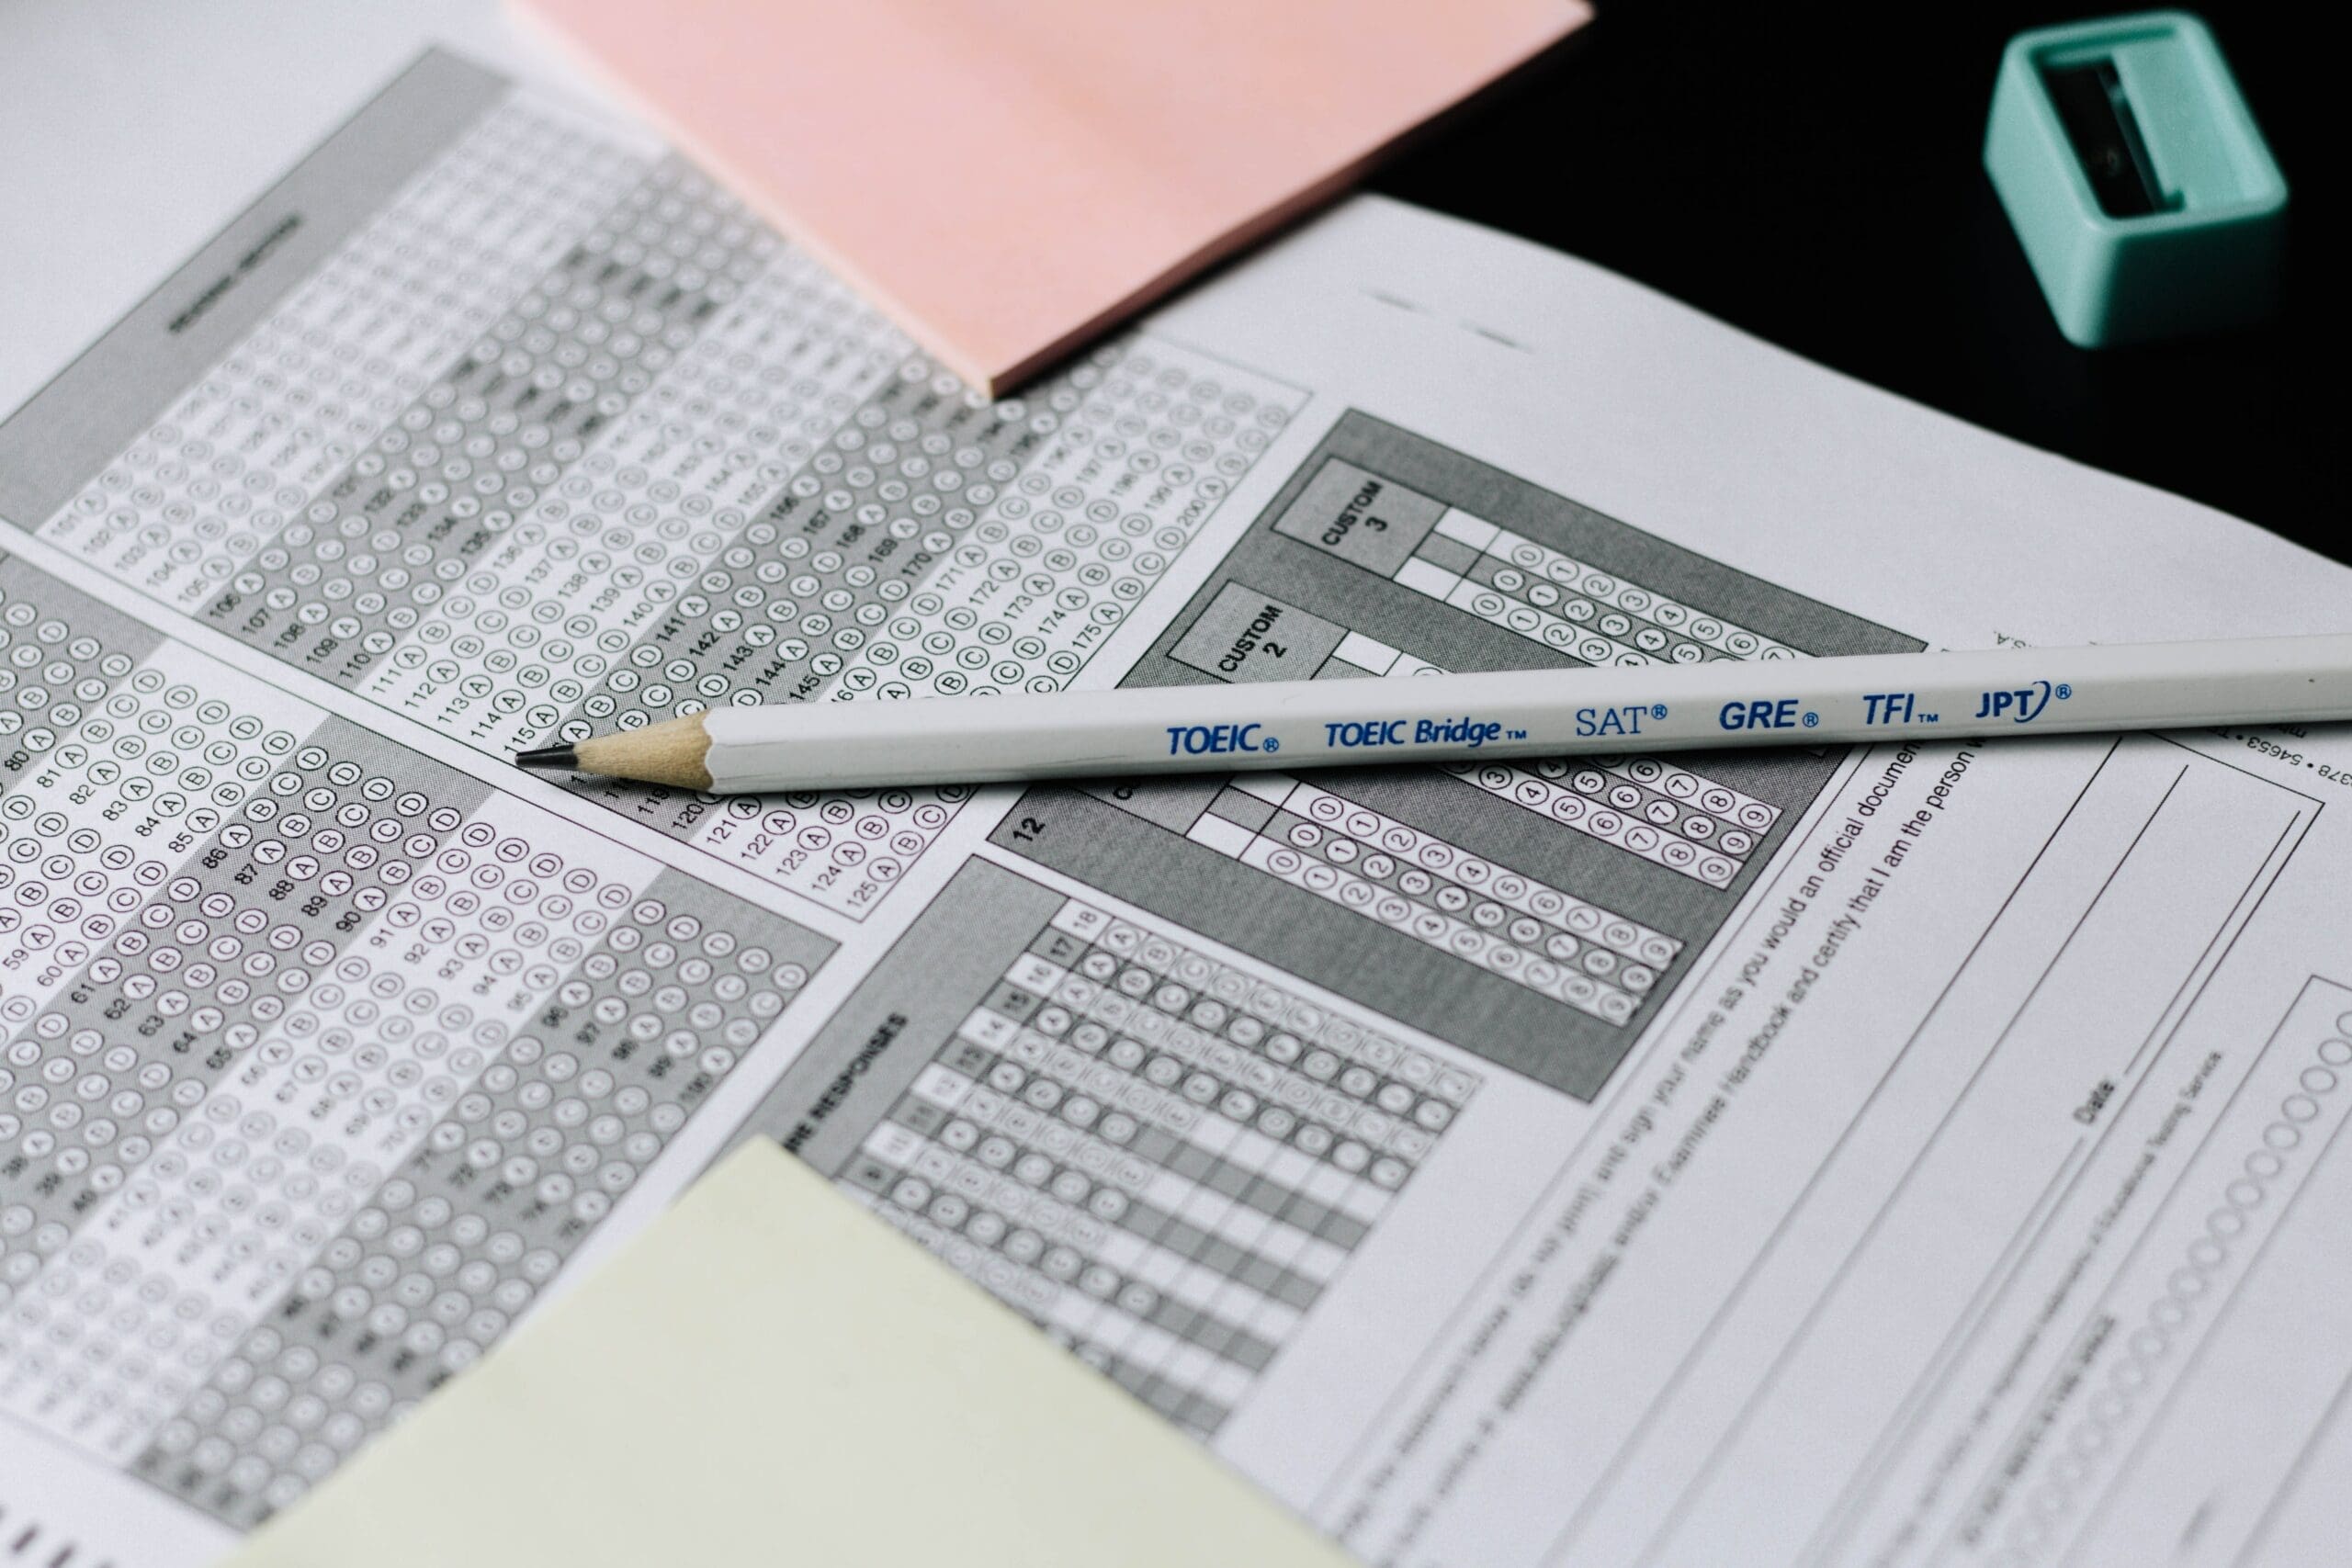 Delaware students performed worse on math tests in the past three years than any other state's students.